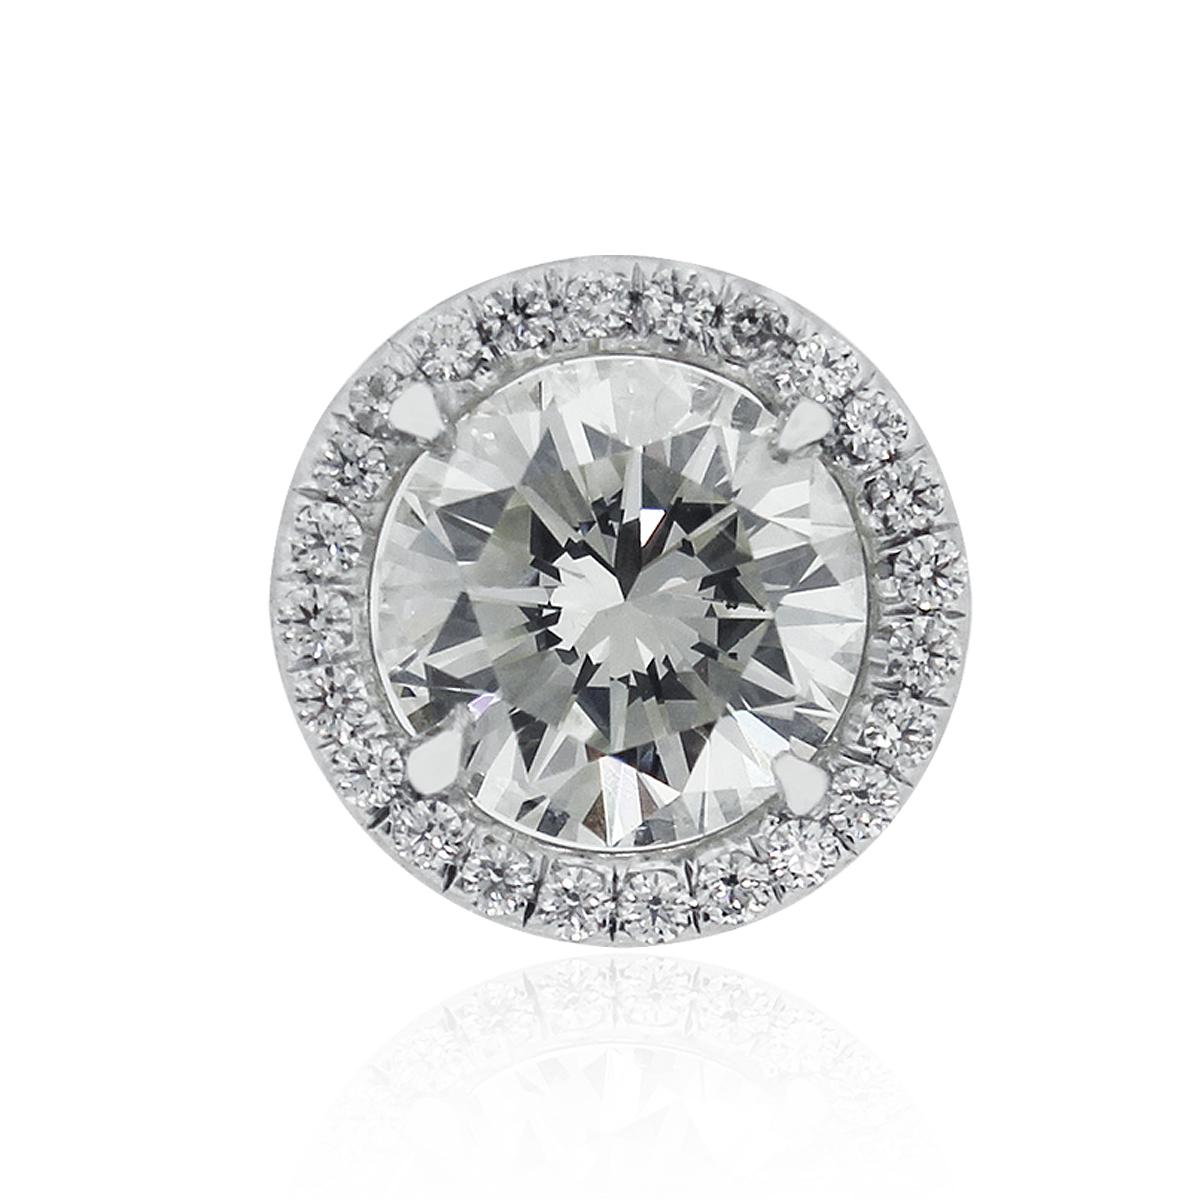 Material: q4k white gold
Center Diamond Details: 1.51ct round brilliant diamond GIA Certified #2165646599. This diamond is M in color and VS2 in clarity.
1.50ct round brilliant diamond GIA Certified #2165646870. This diamond is M in color and SI1 in